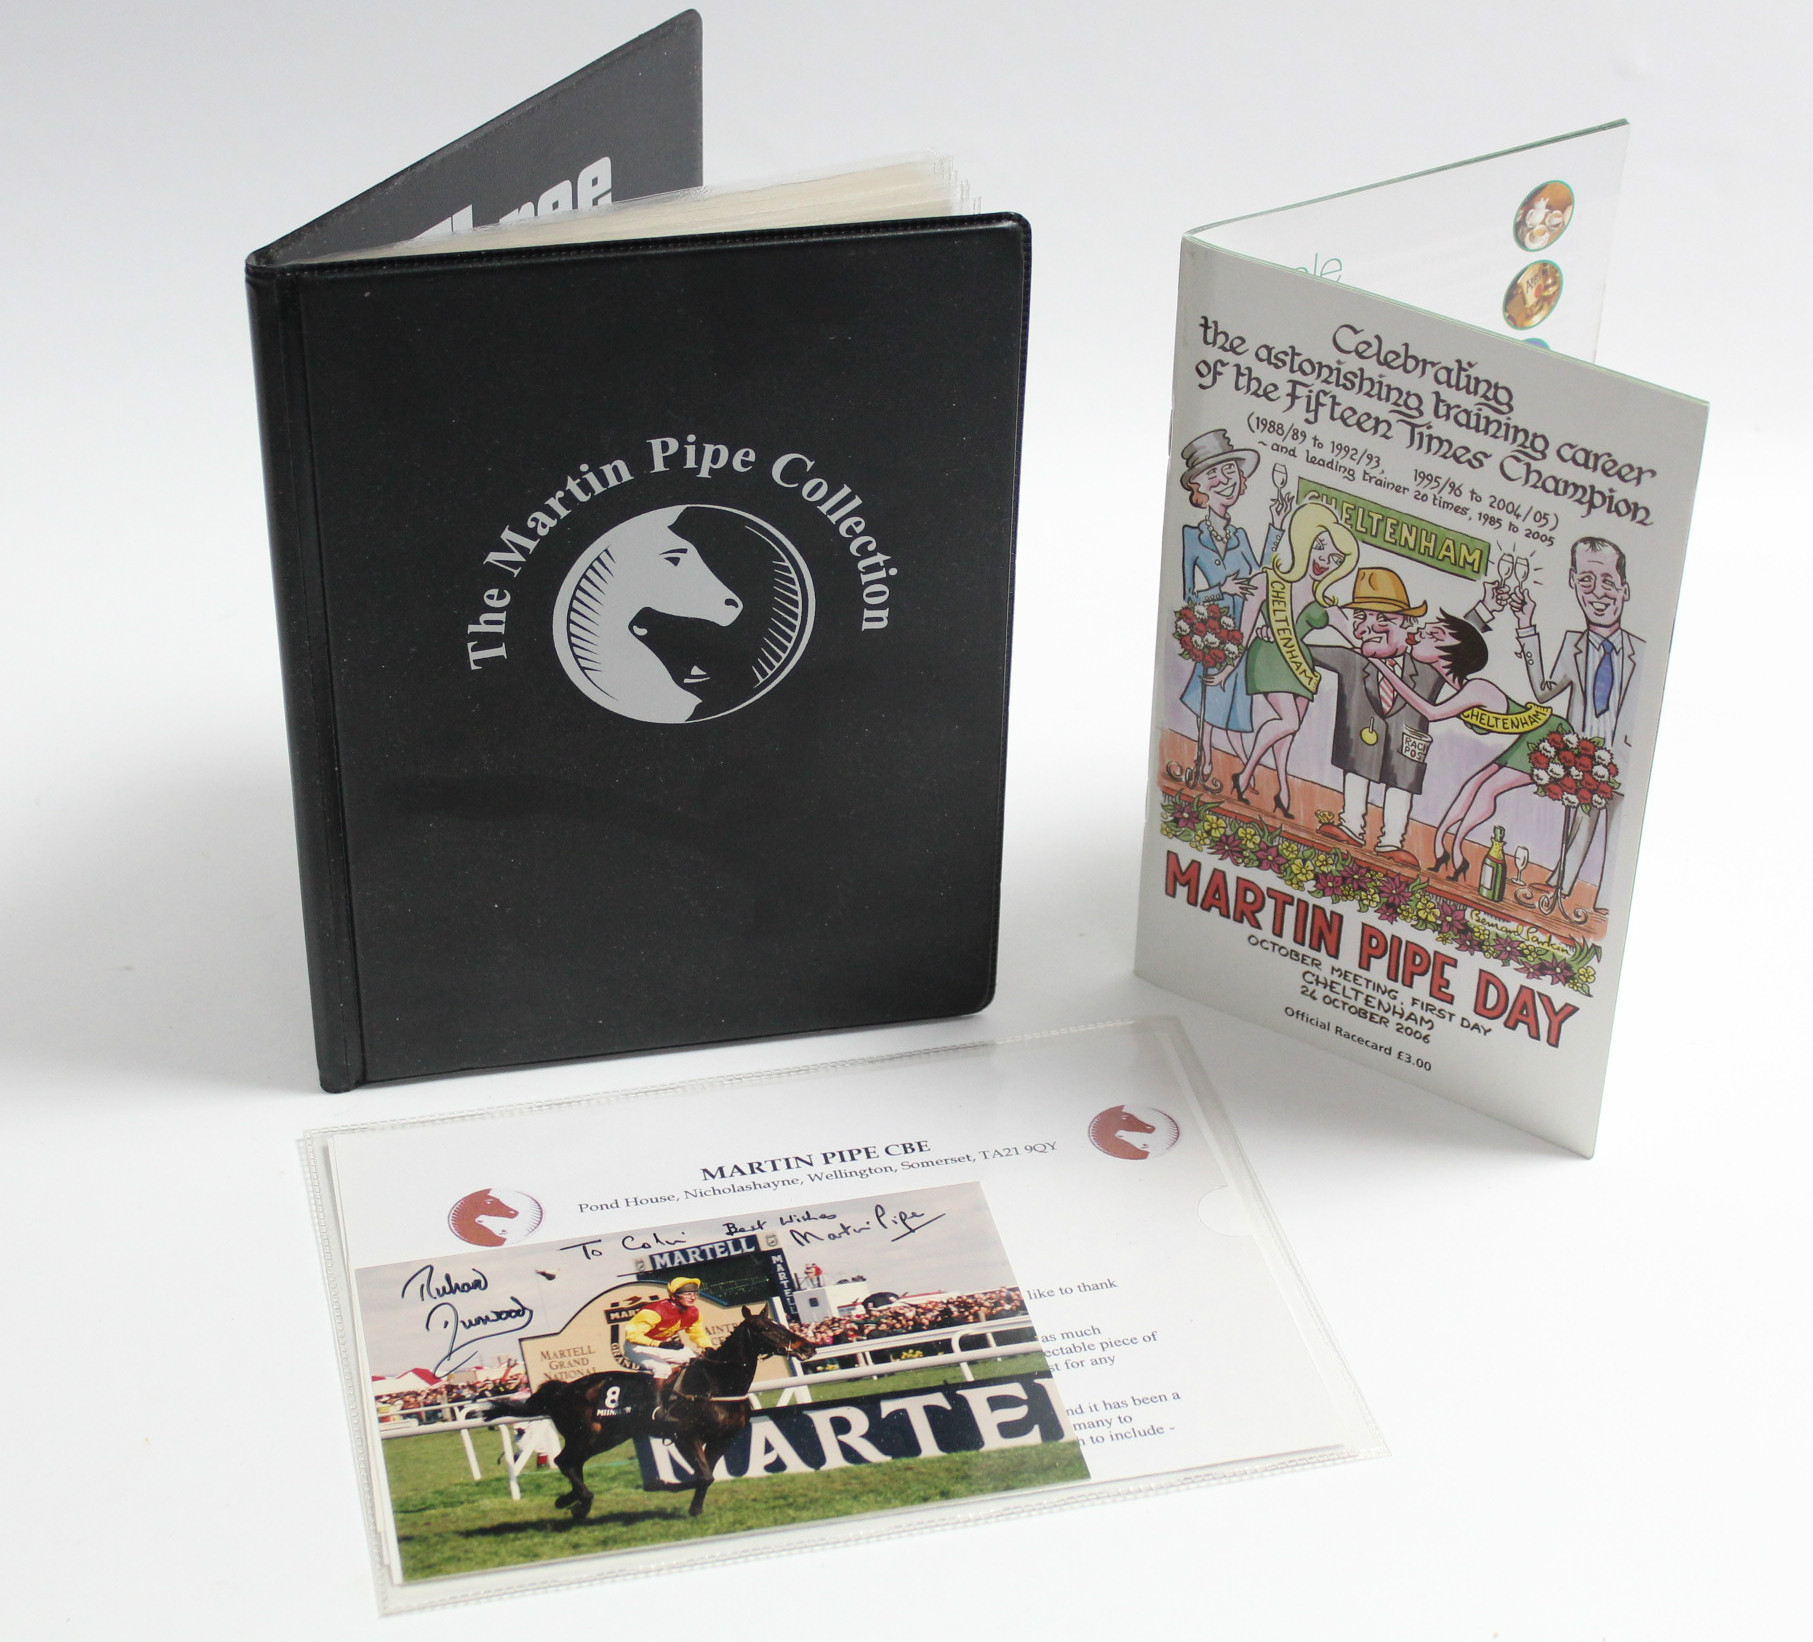 A Martin Pipe (racehorse trainer) collection set autographed by Martin Pipe & Richard Dunwoody. - Image 3 of 3